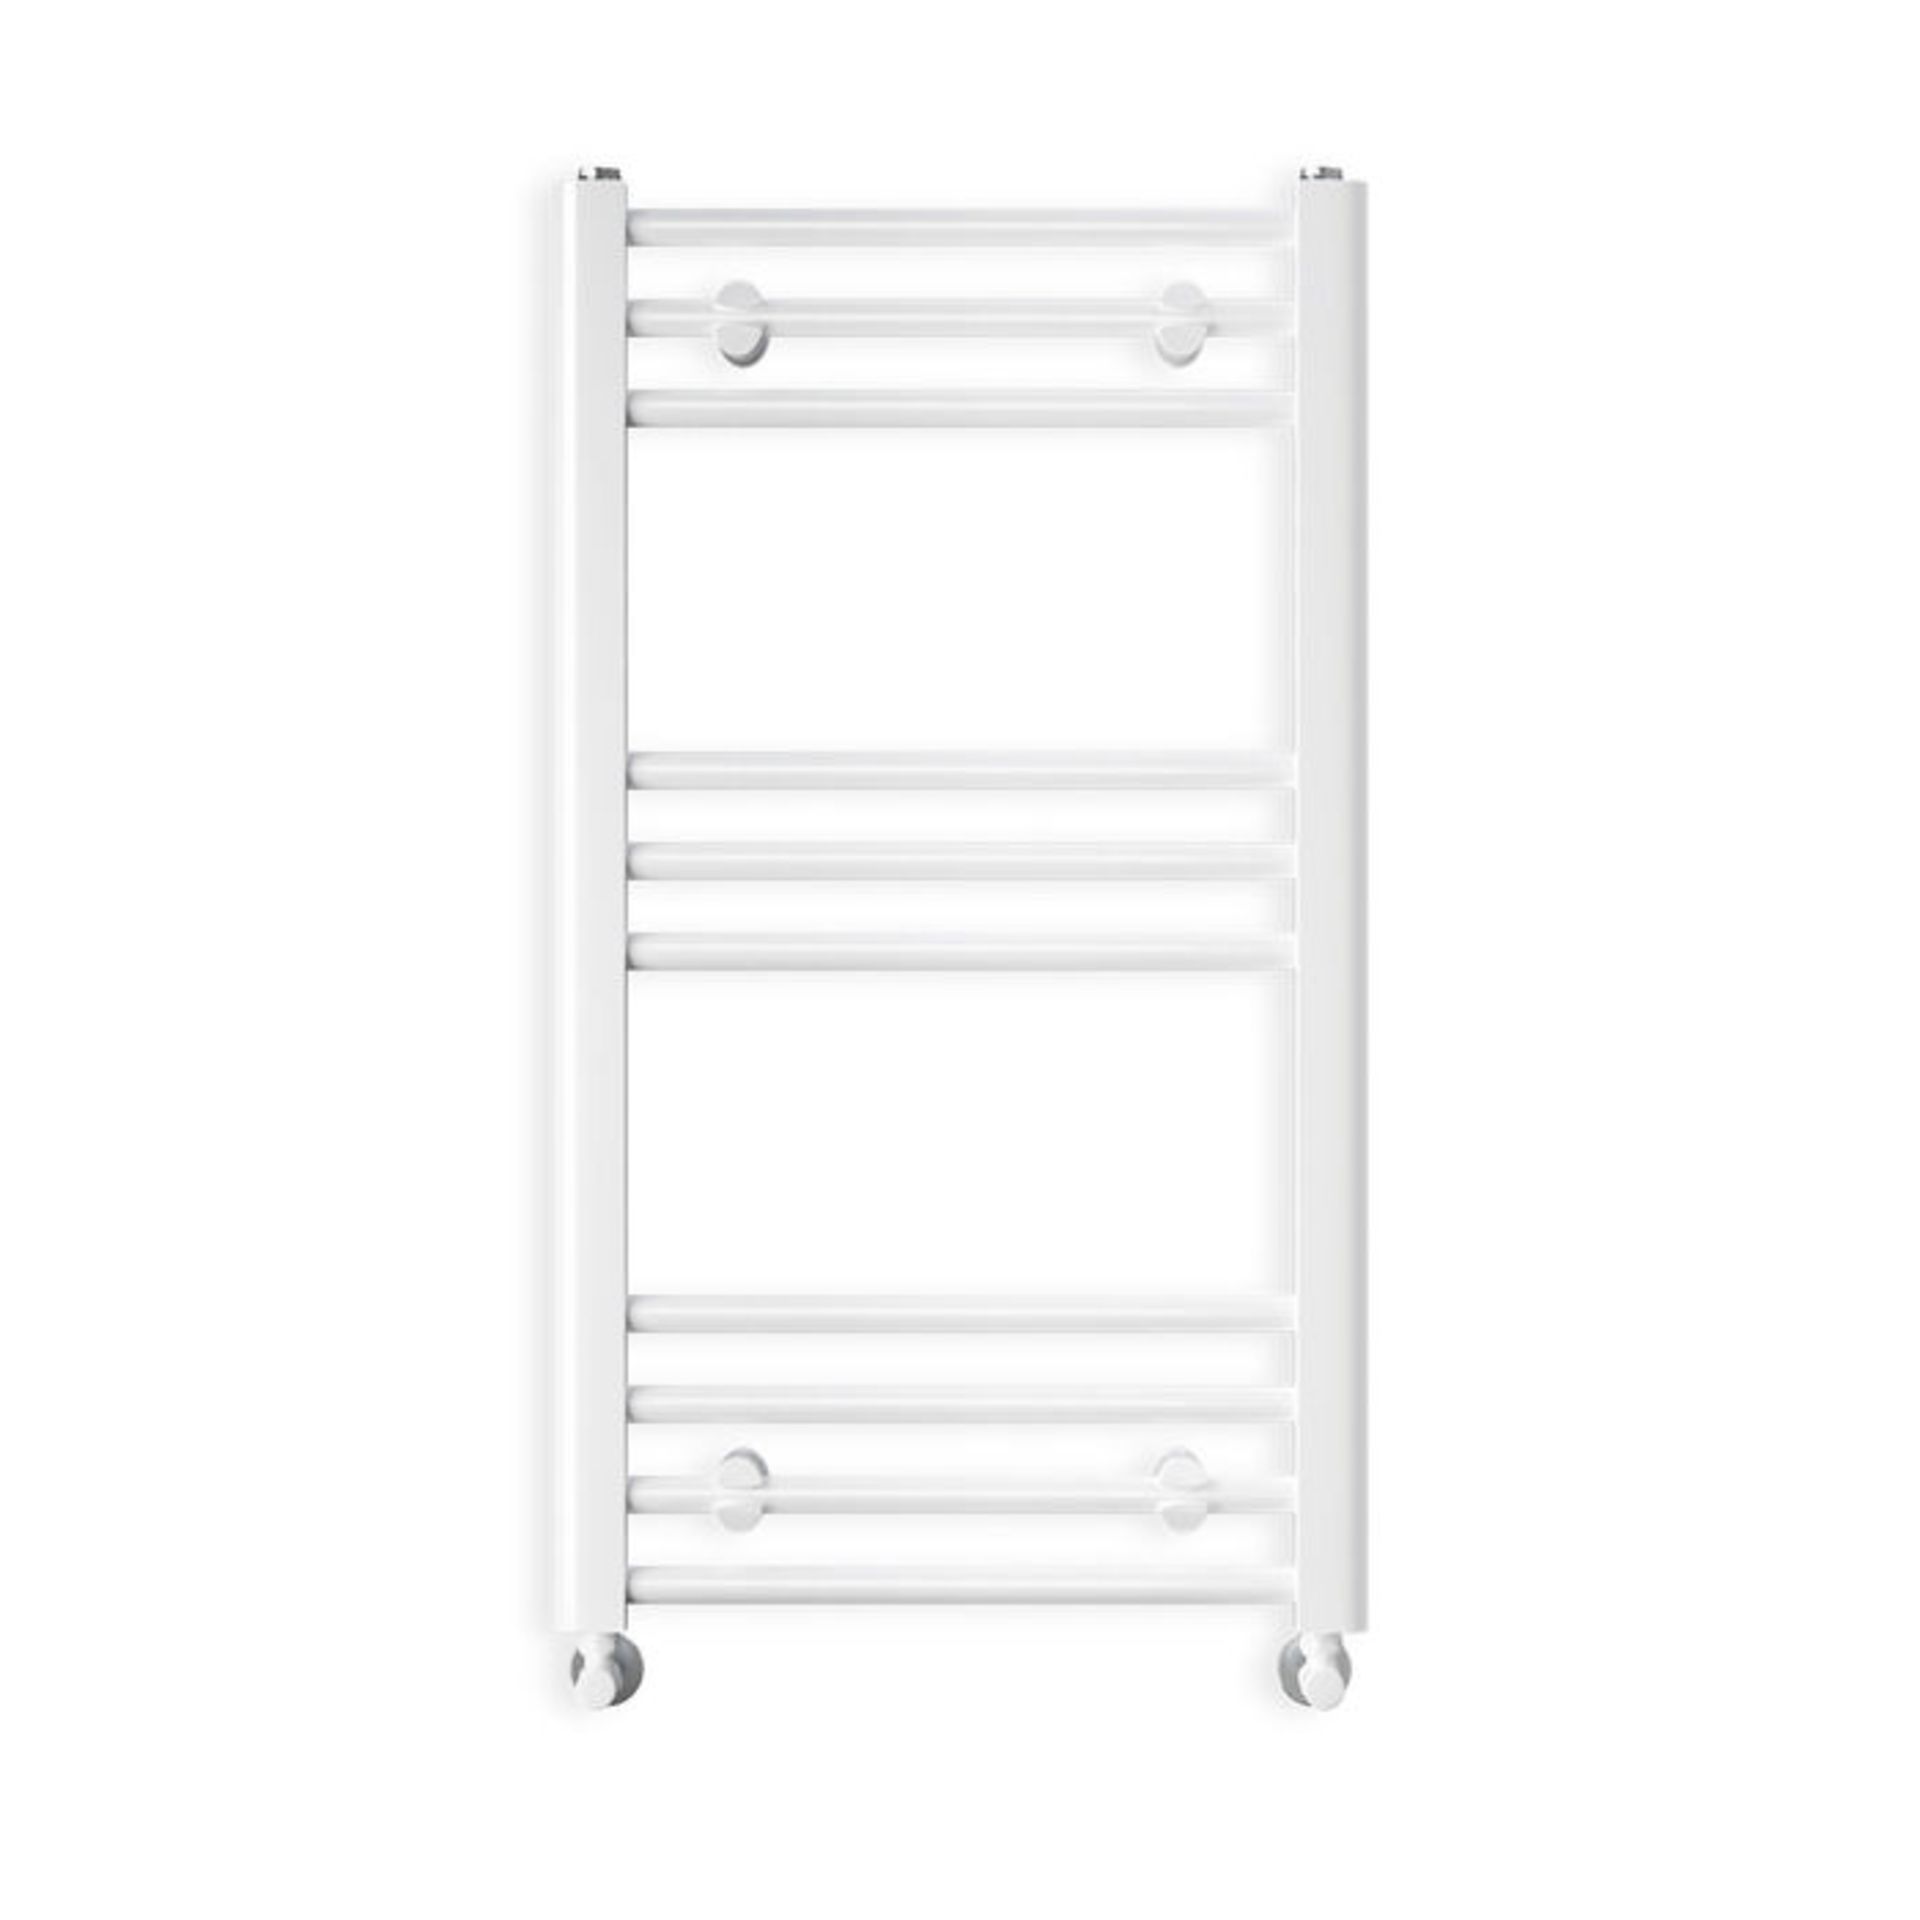 (XX92) 1100x500mm White Matt Heated Towel Radiator. . Made from low carbon steel Finished with... - Image 2 of 2